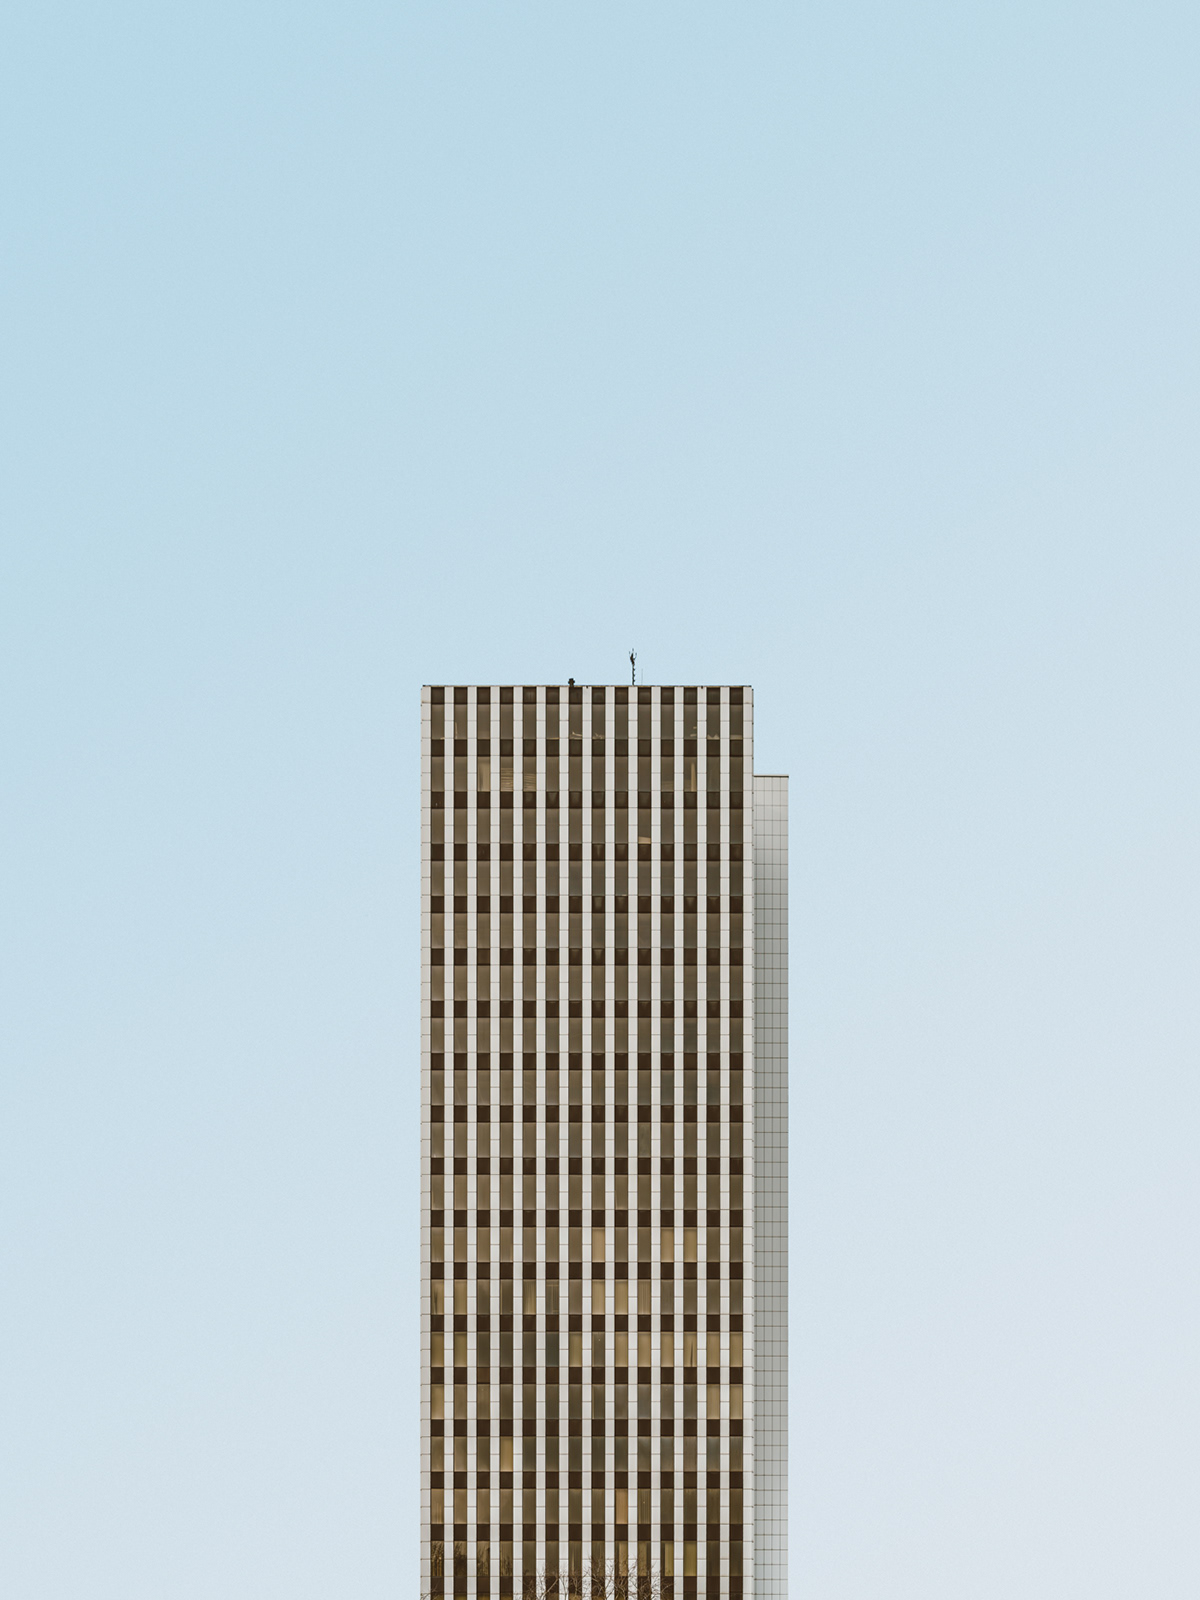 buildings Minimalism architecture Urban tower highrise SKY